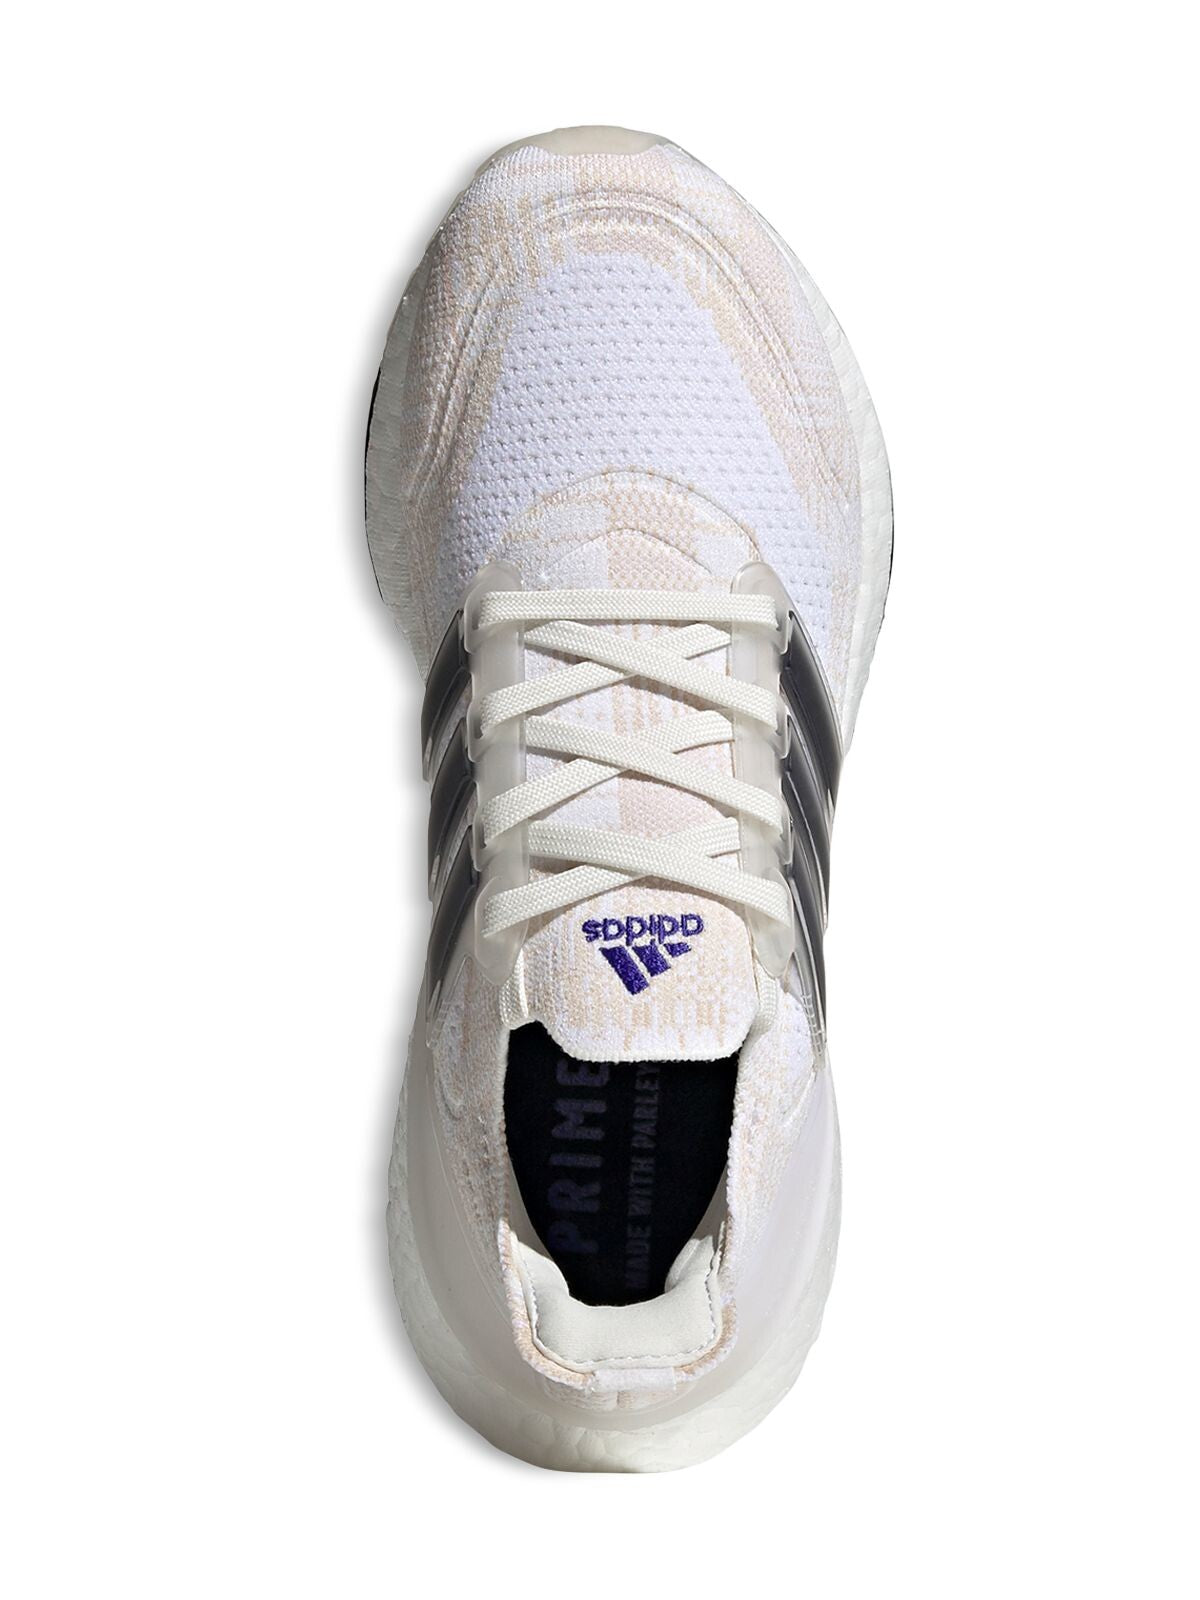 ADIDAS Womens White 1" Platform Removable Insole Comfort Logo Ultraboost 21 Prime Round Toe Wedge Lace-Up Athletic Running Shoes 6